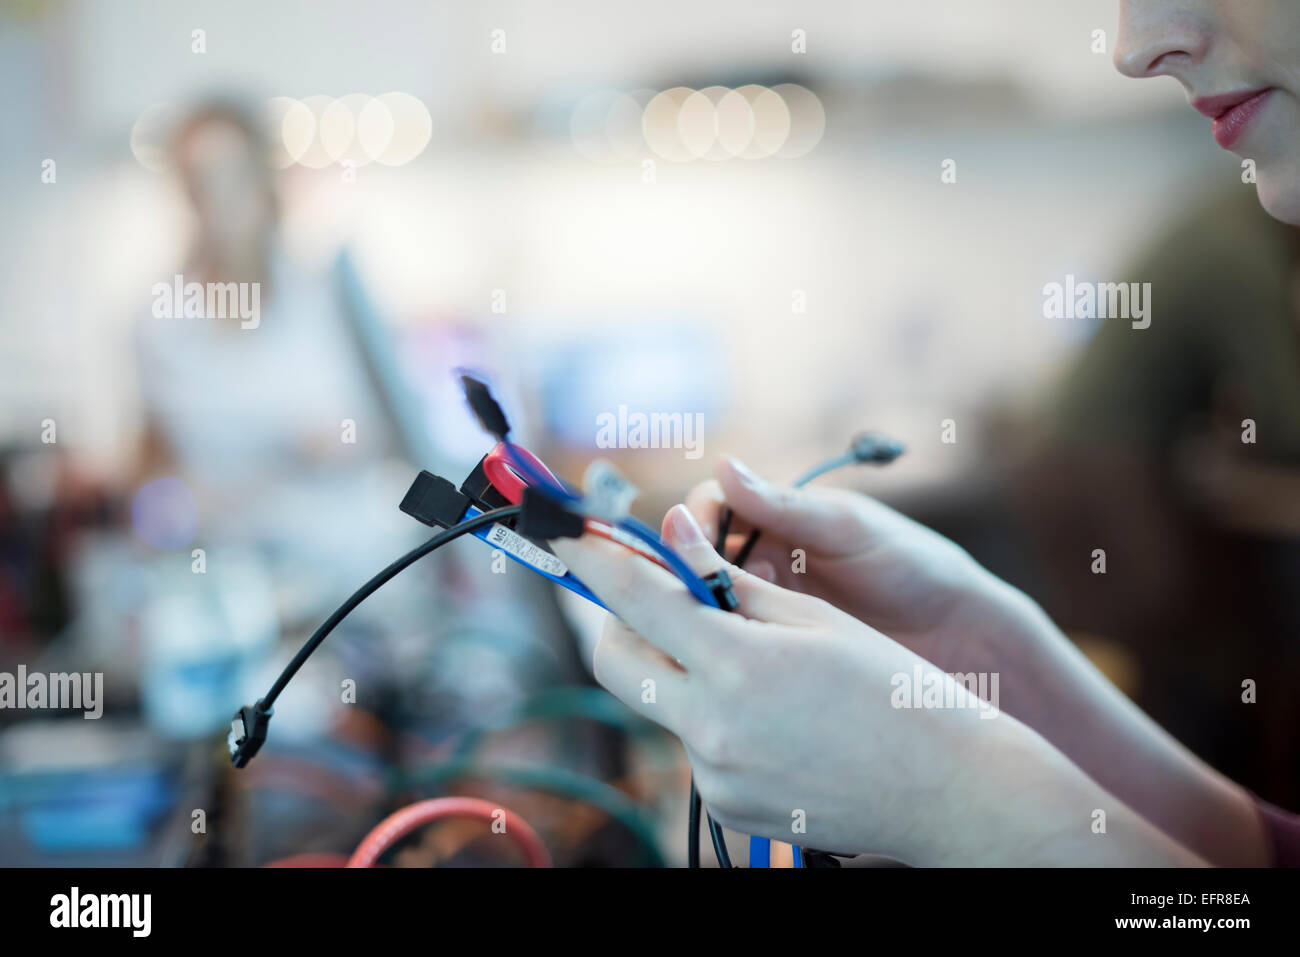 A young woman using connecting cables and usb leads in a computer repair shop. Stock Photo